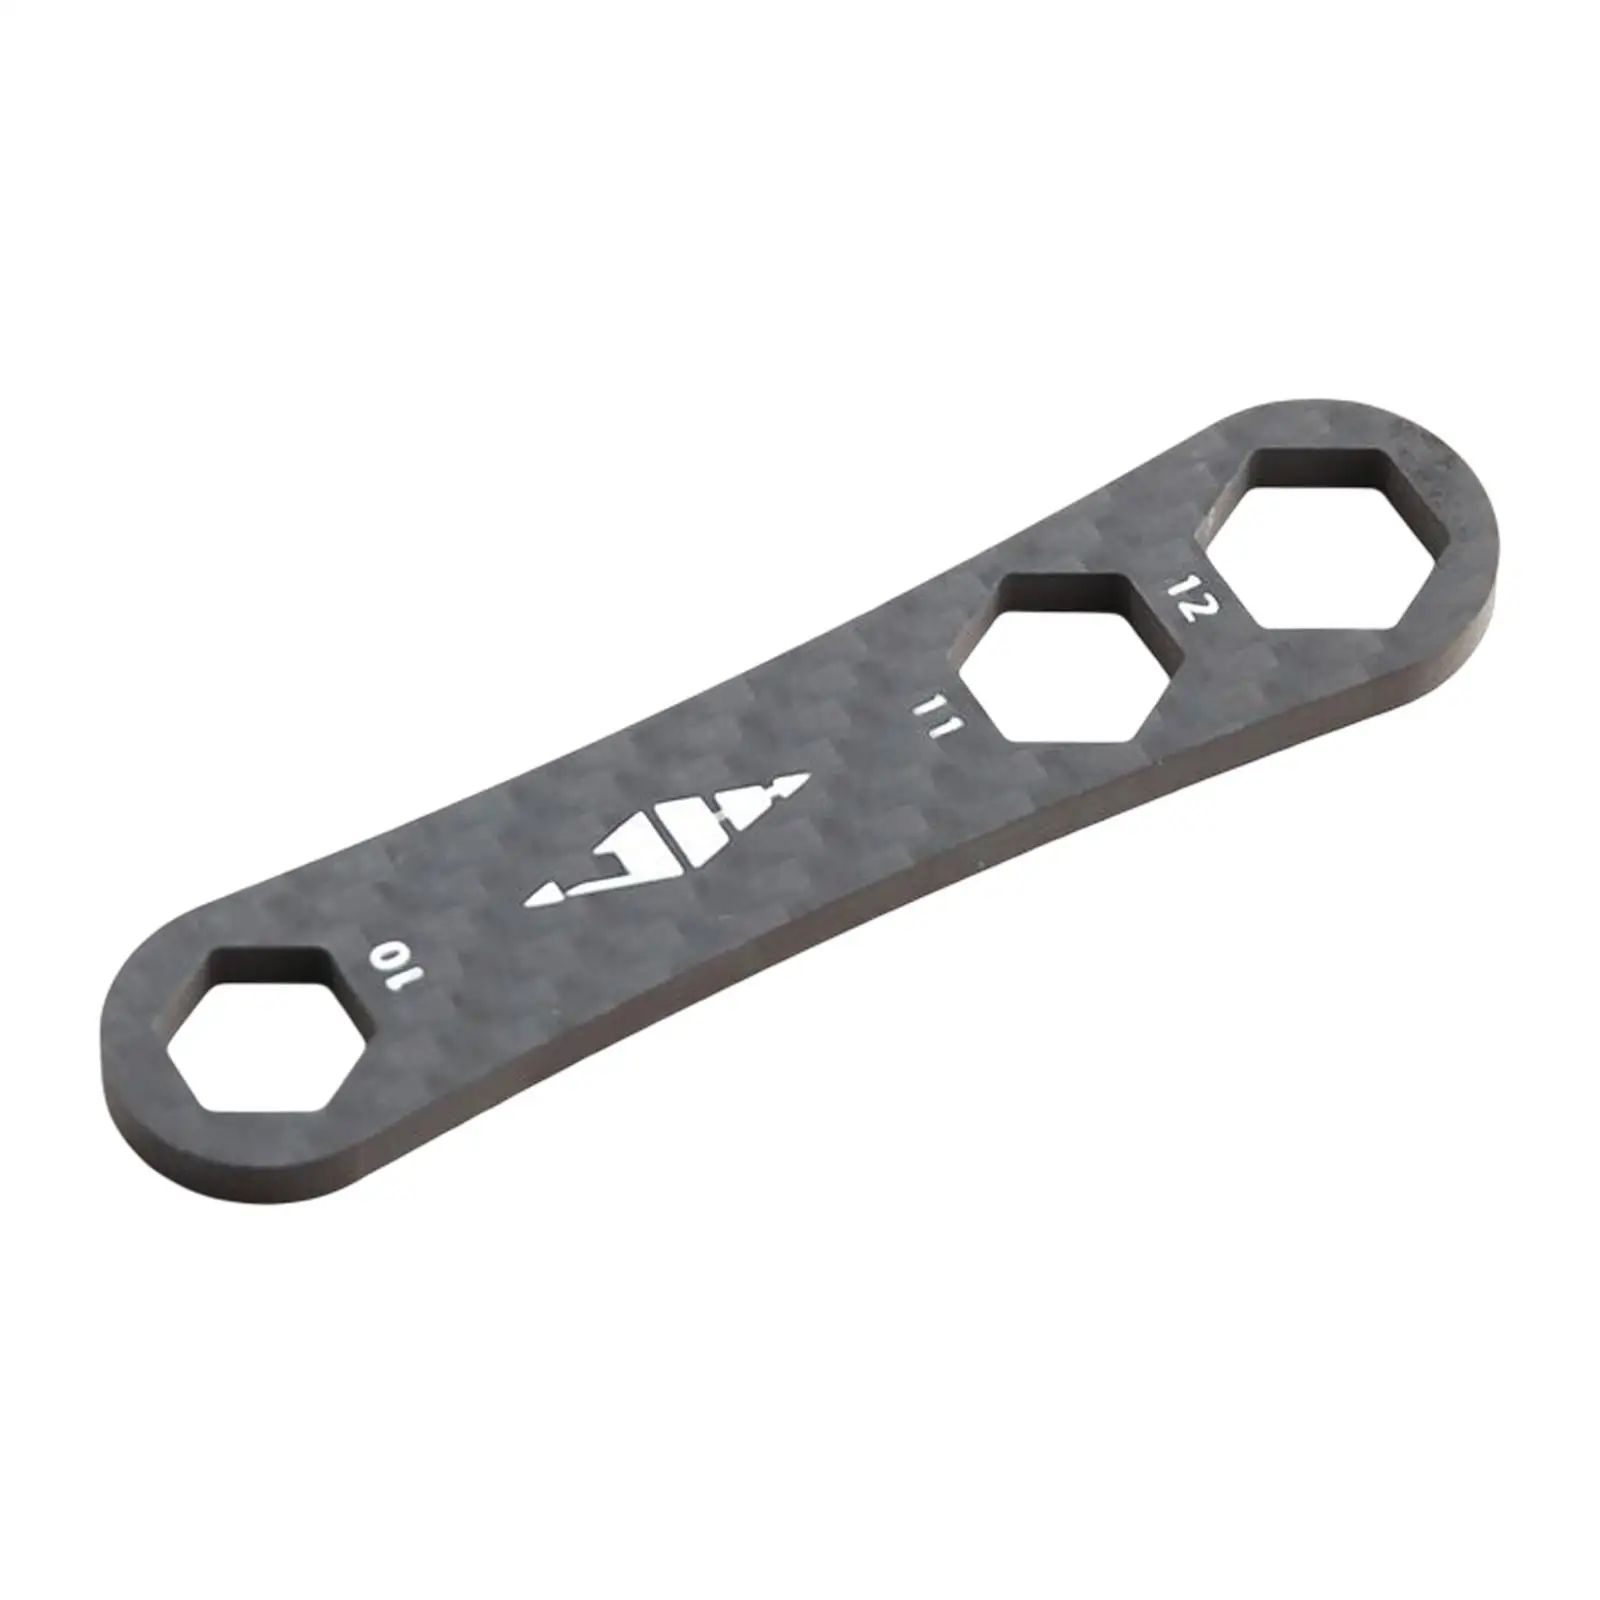 Portable Fishing Reel Care Maintenance Wrench Wrench for DIY Modified Tool